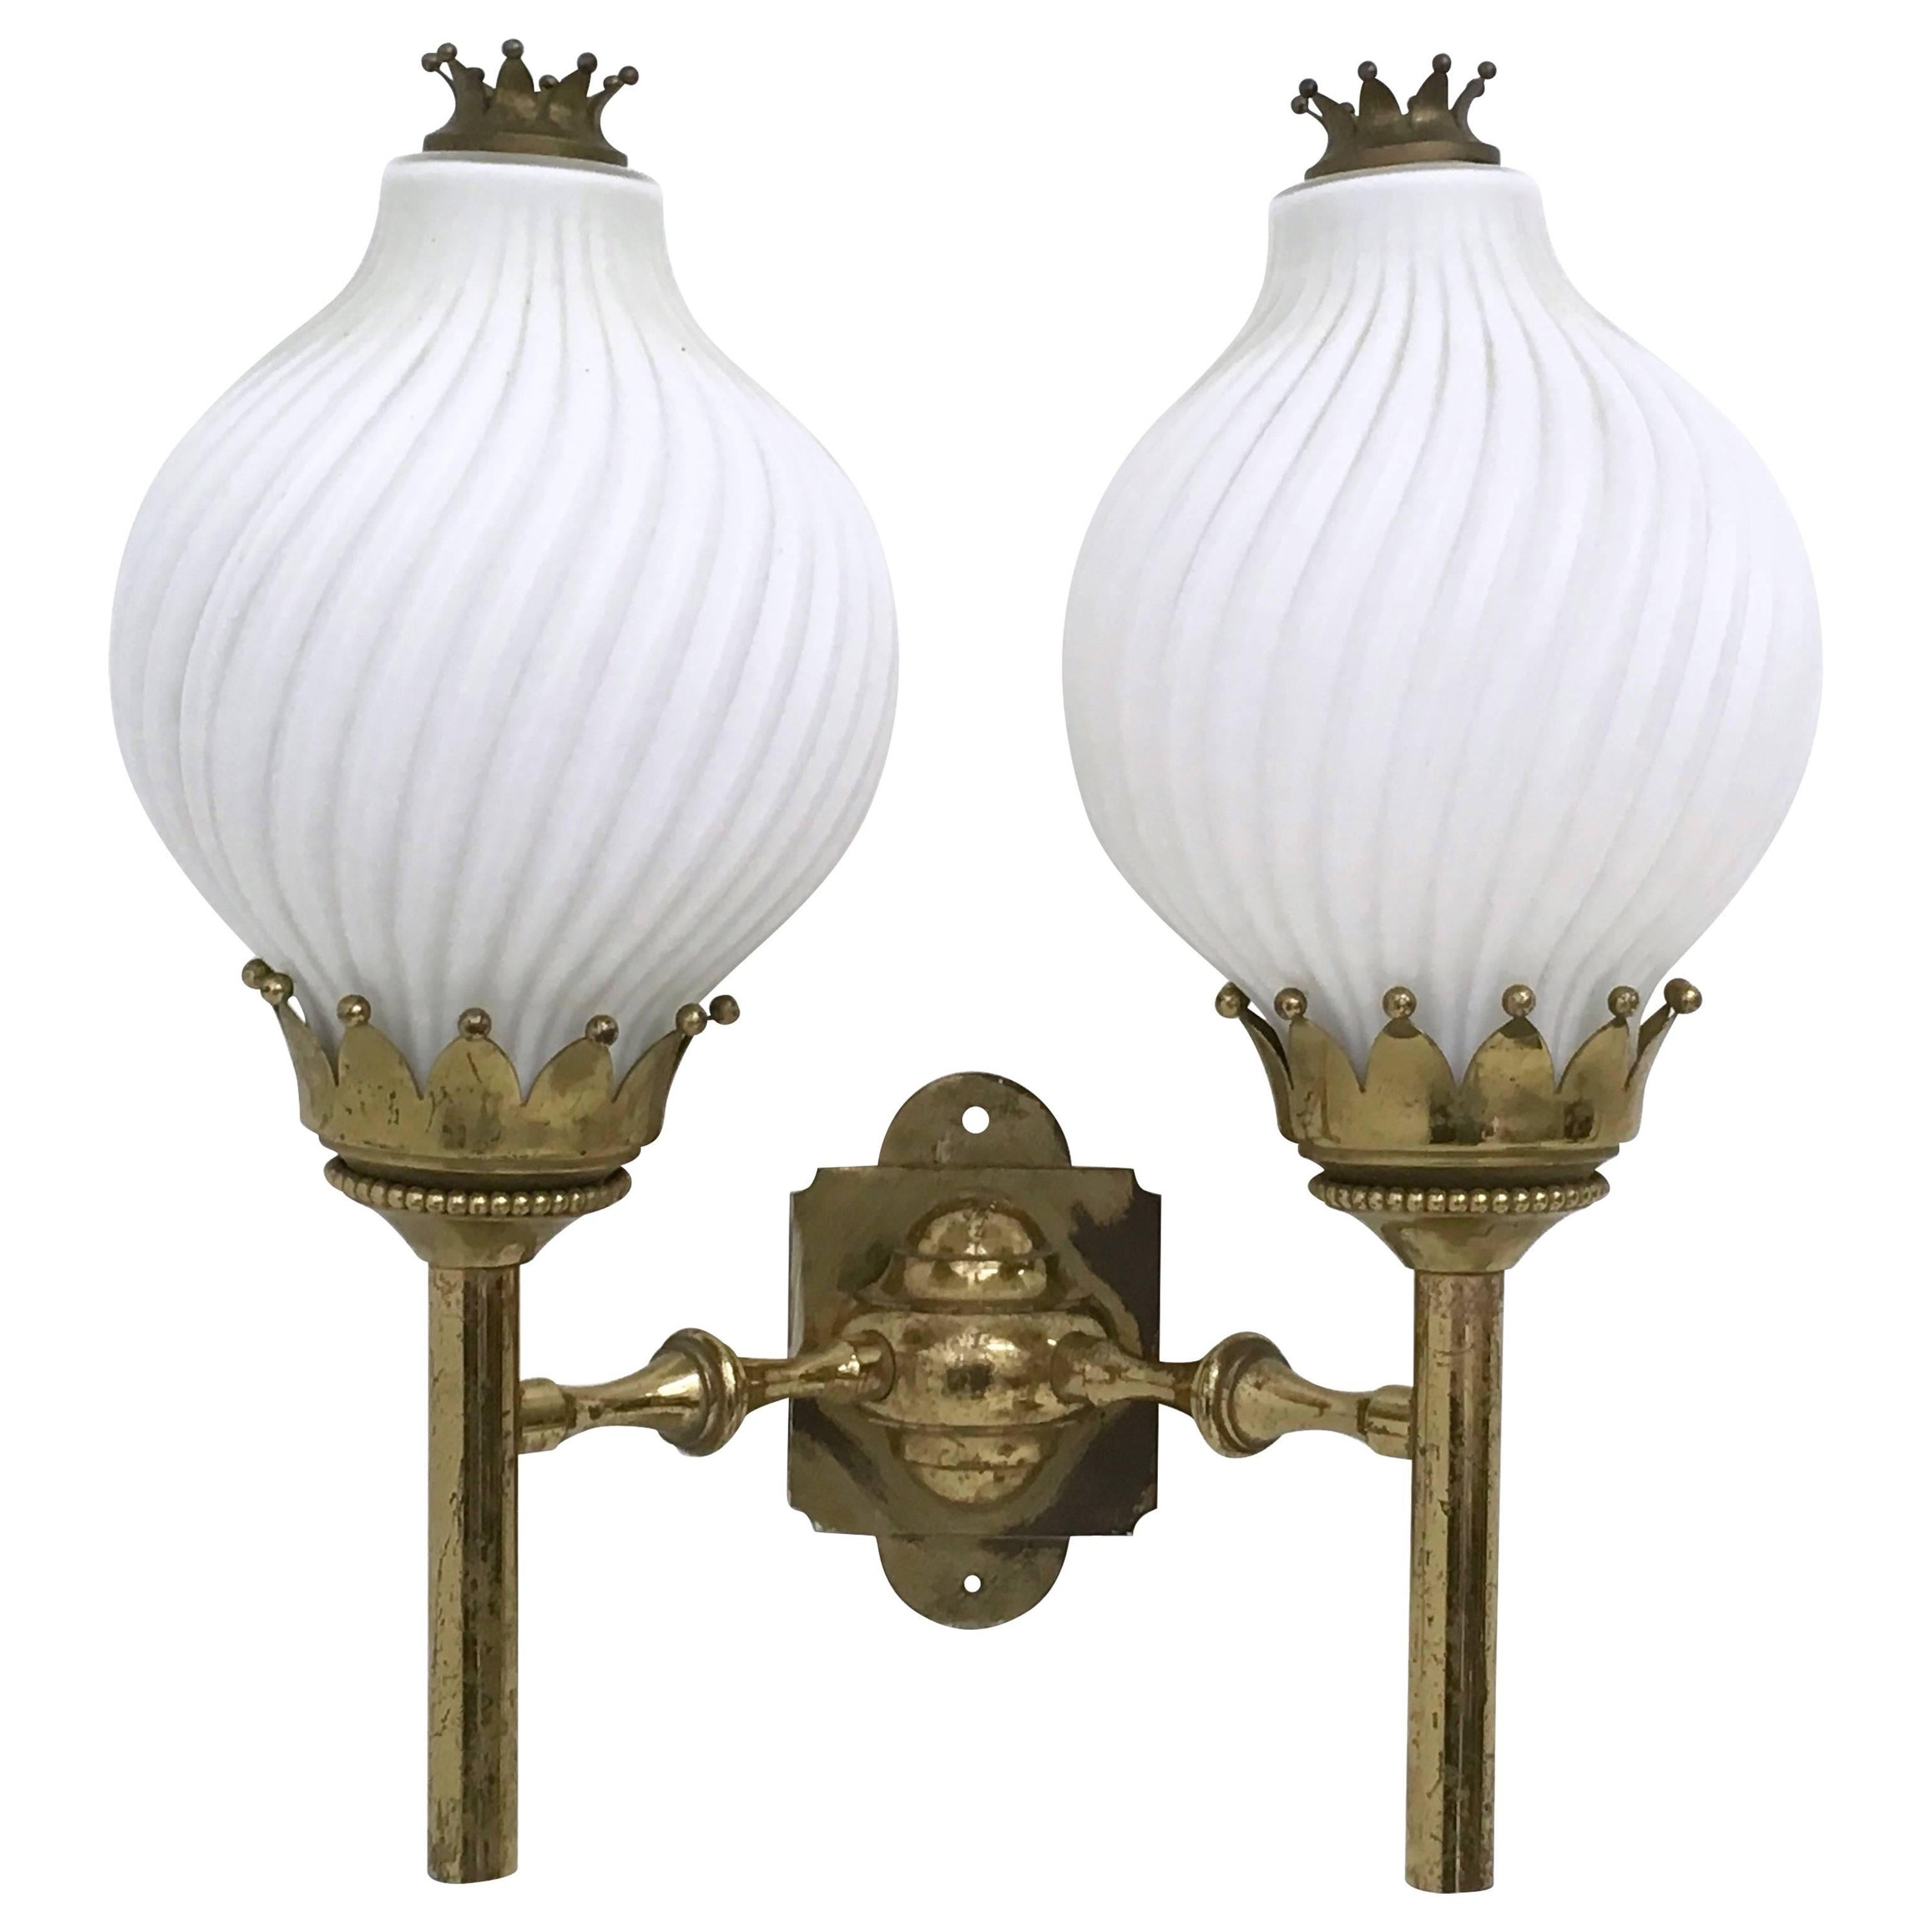 Large Vintage Two-Light Opaline Glass and Brass Sconce by Arredoluce, Italy For Sale